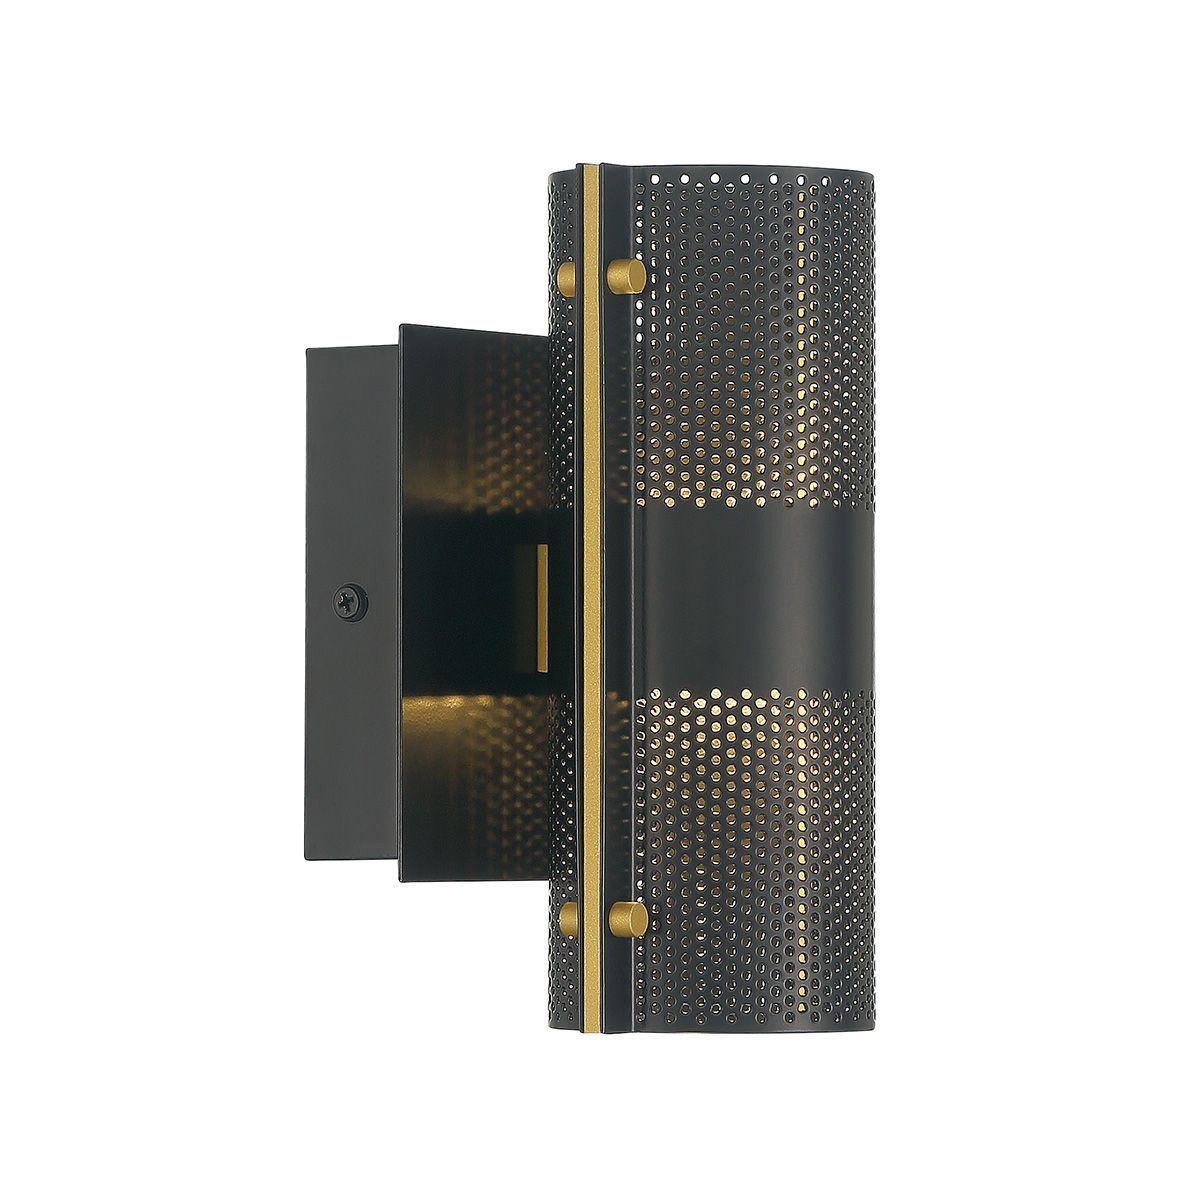 Westcliffe 2 Lights 8 In. LED Outdoor Wall Sconce Black finish